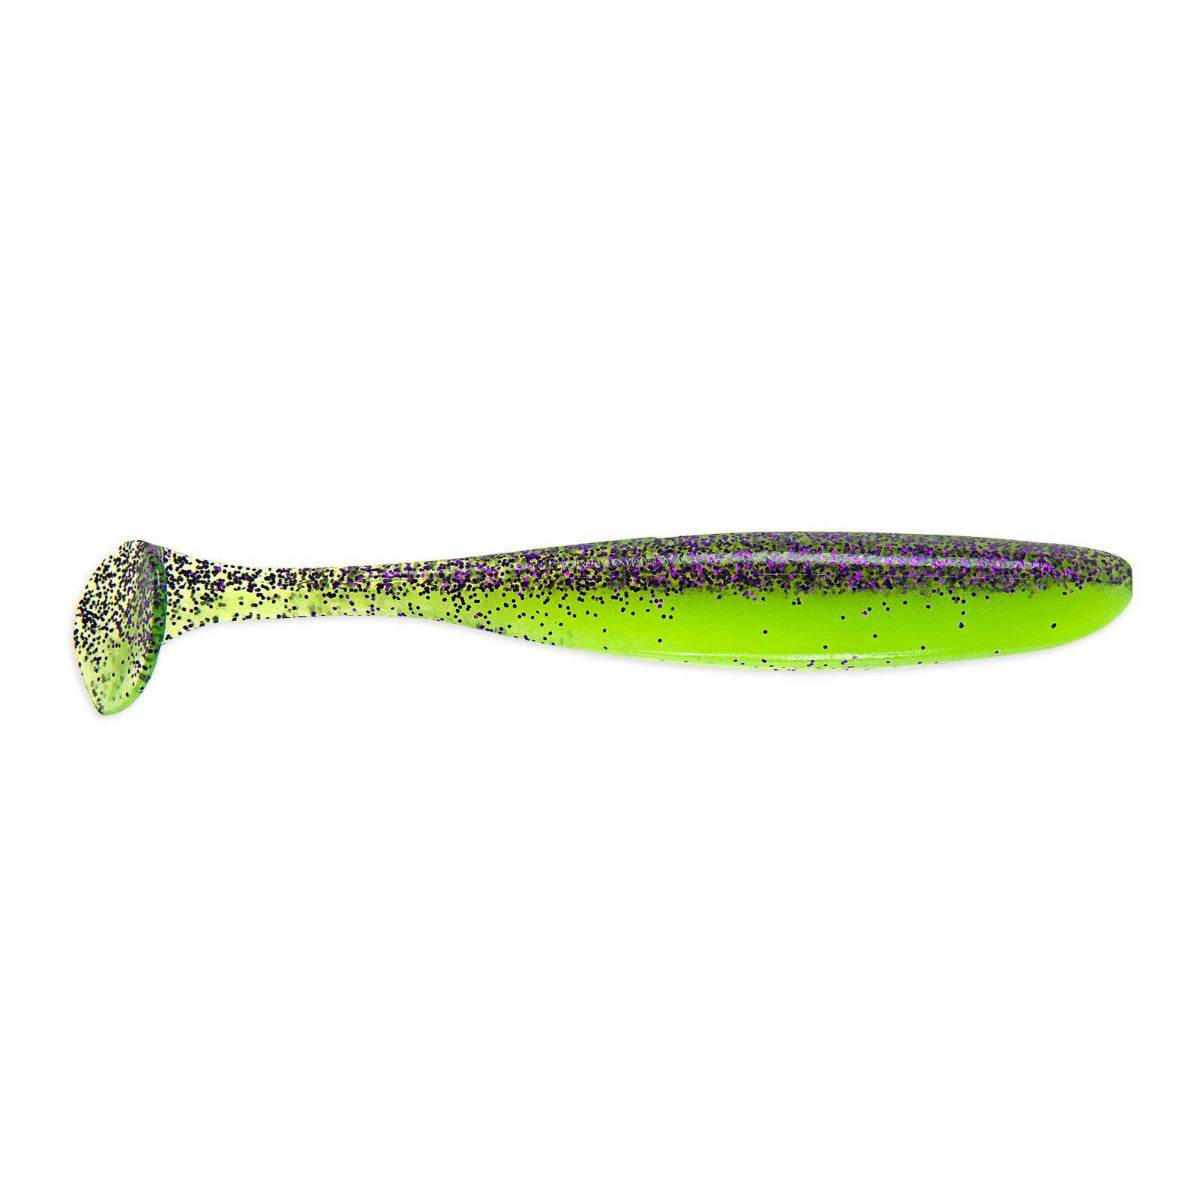 Keitech Easy Shiner Purple Chartreuse